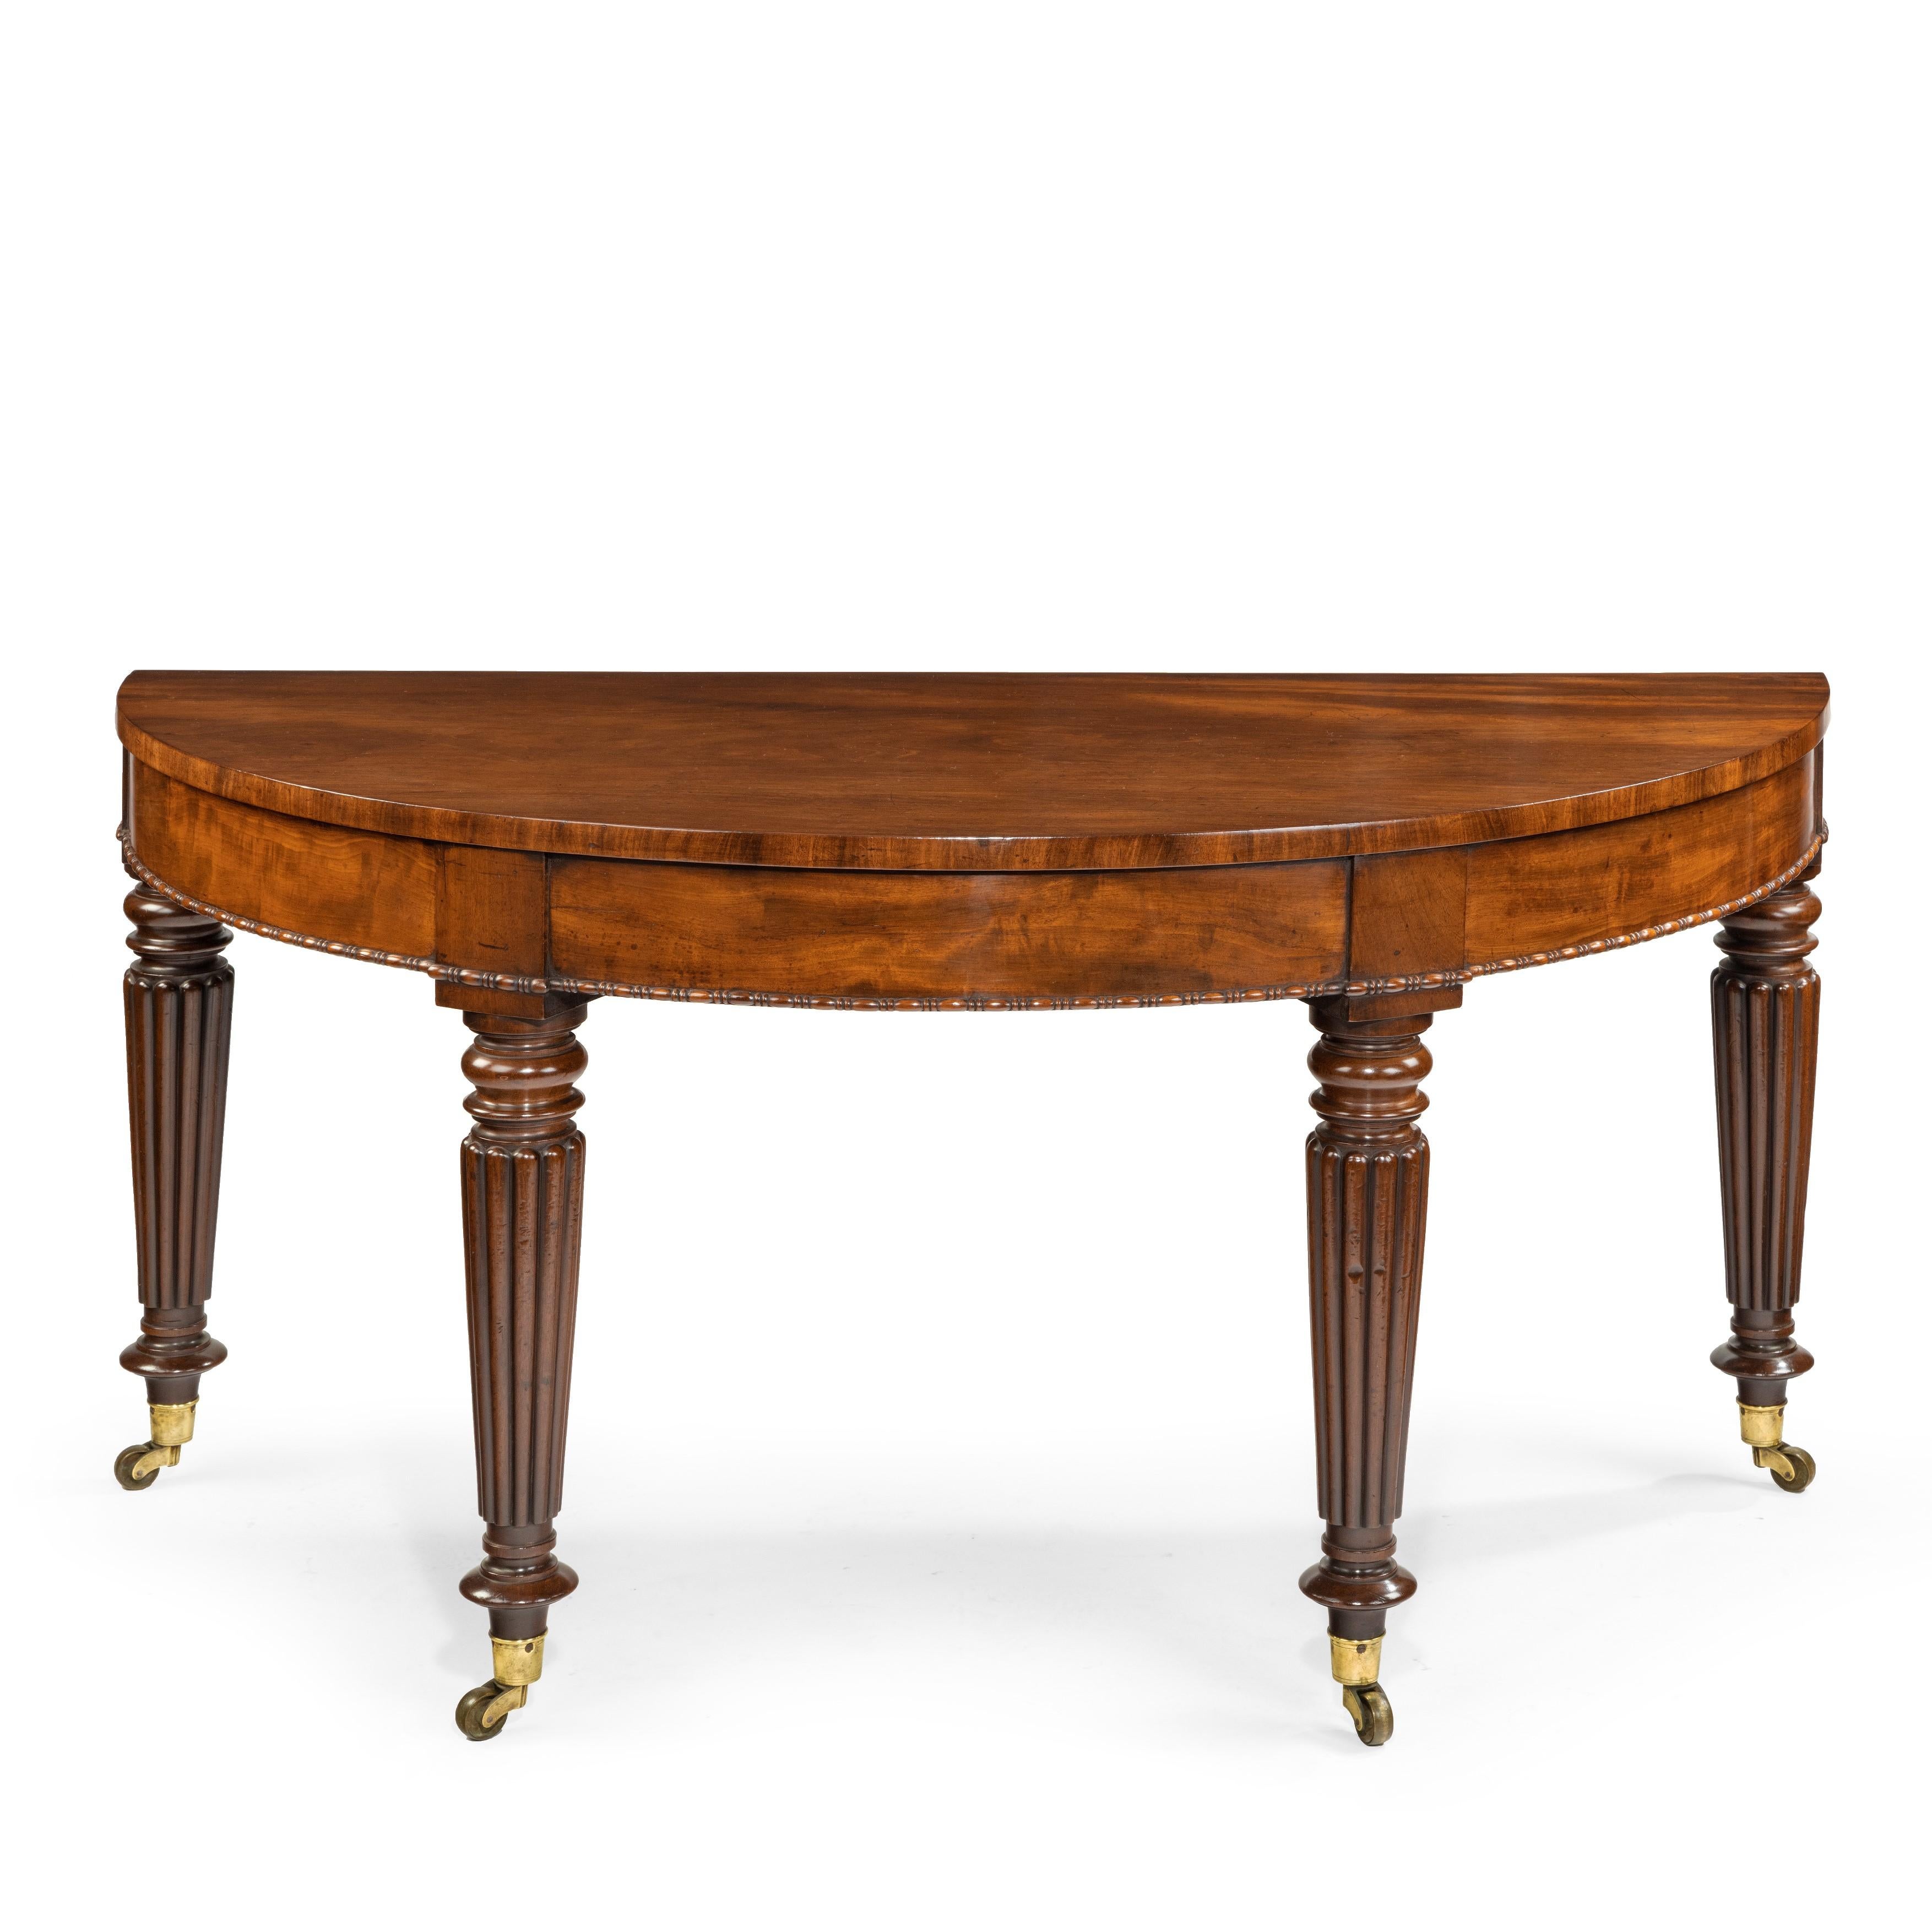 English Early Victorian Mahogany Console Tables Attributed to Gillows